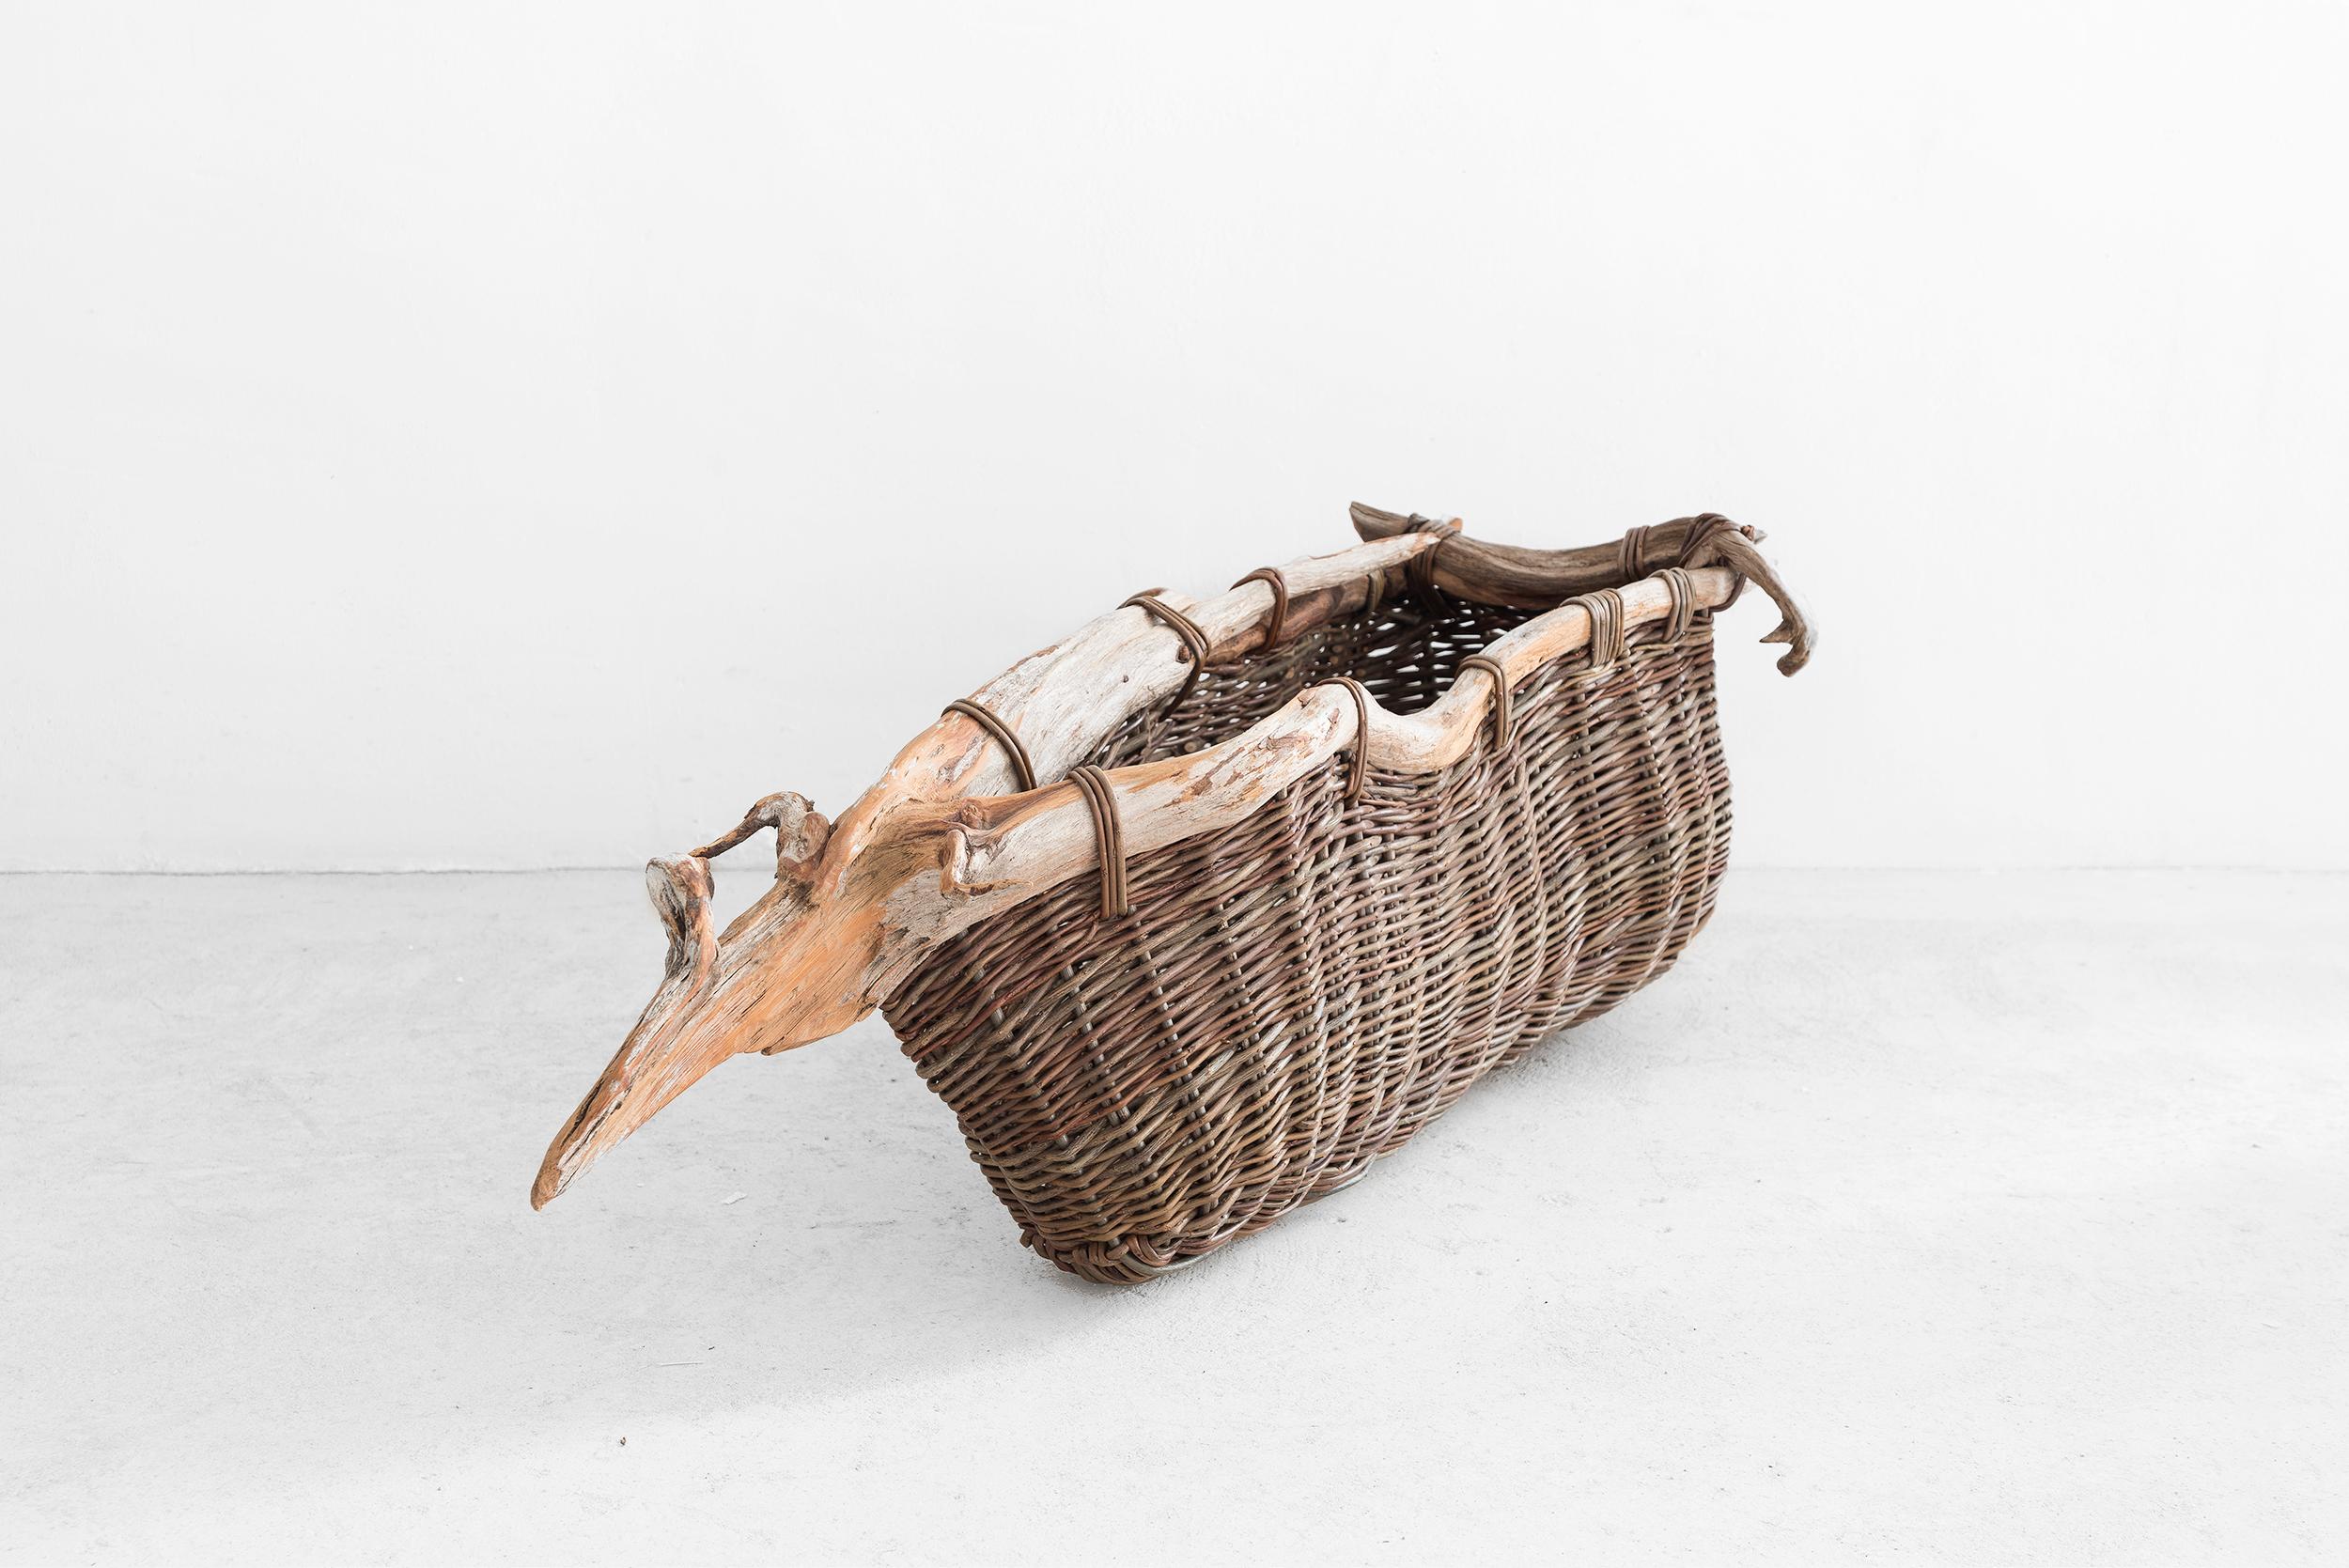 Bog Boat Going To Ground
Manufactured by Joe Hogan
Produced in exclusive for SIDE GALLERY
Ireland, 2020
Bog pine(roots of pine trees which had been covered with peat for 3000 yeas) and willow rods, variety Harrisons

Measurements
97 cm x 36